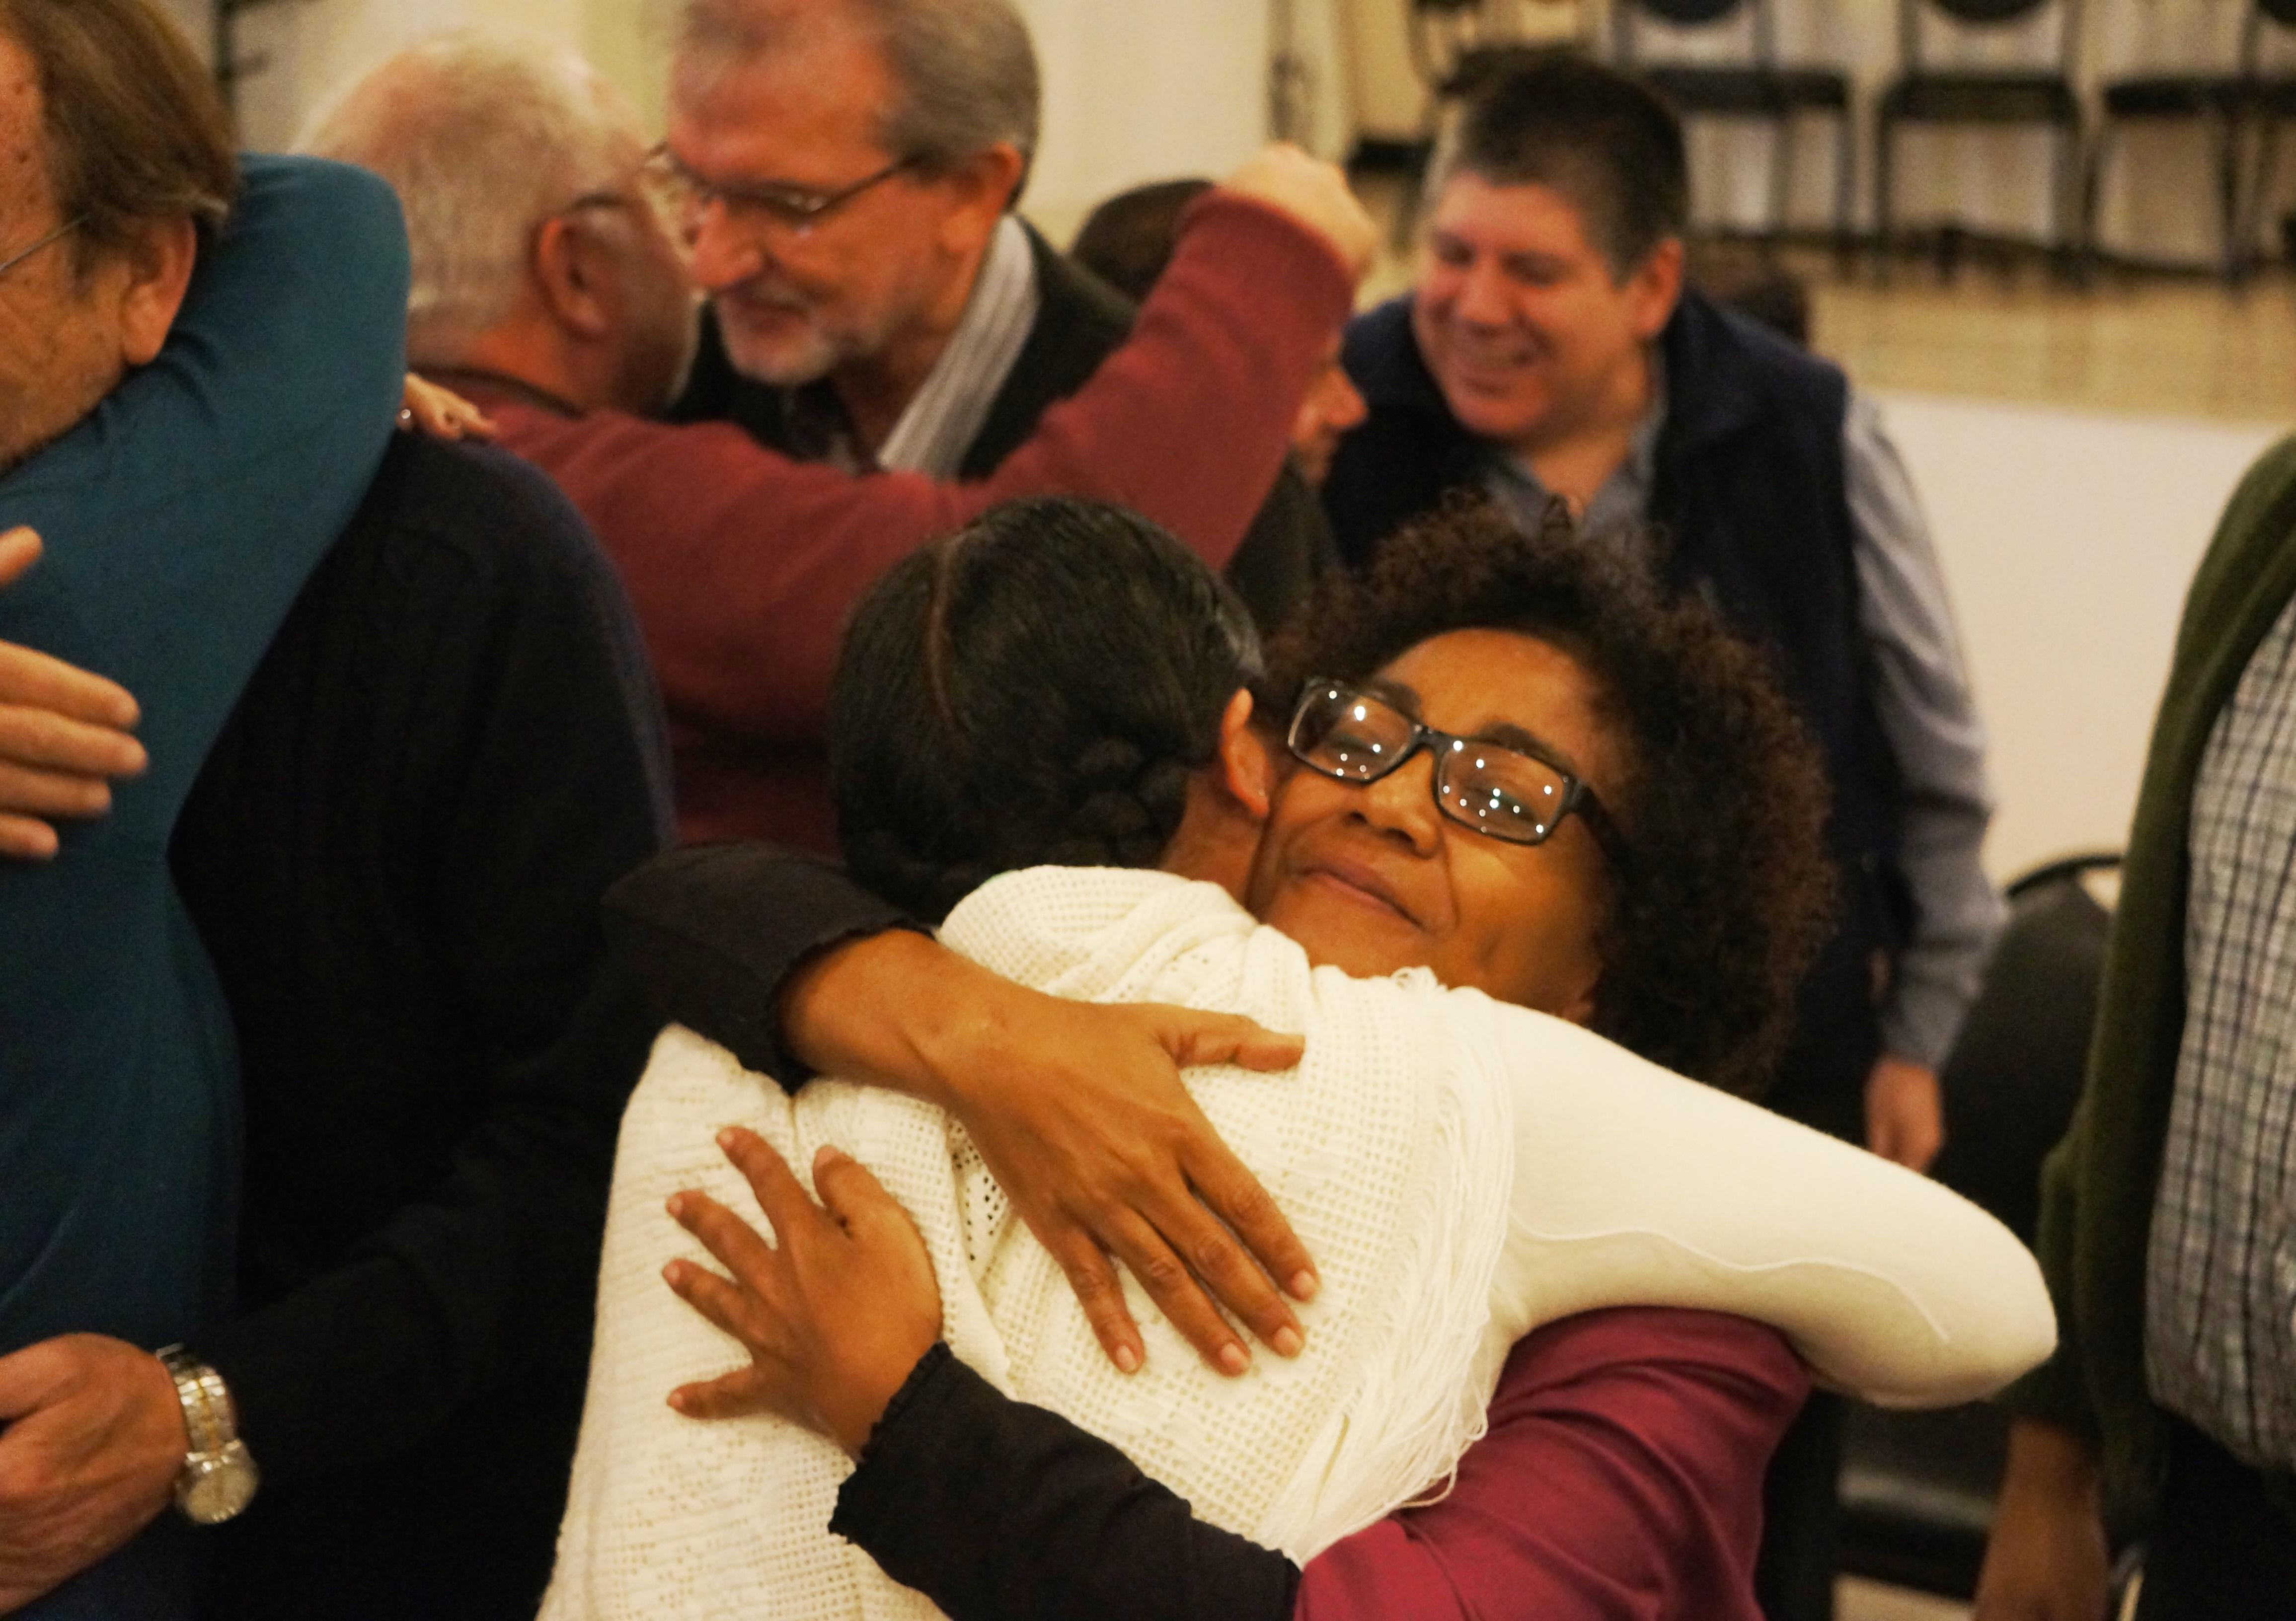 Rev. Marjory Slagtand, board chairperson of the Evangelical Lutheran Church in Suriname, embracing Roxana Gutierrez from the Bolivian Evangelical Lutheran Church. The Surinamese church will host the LWF Pre-Assemblies for the LAC and North American regions. Photo: LWF/Eugenio Albrecht 